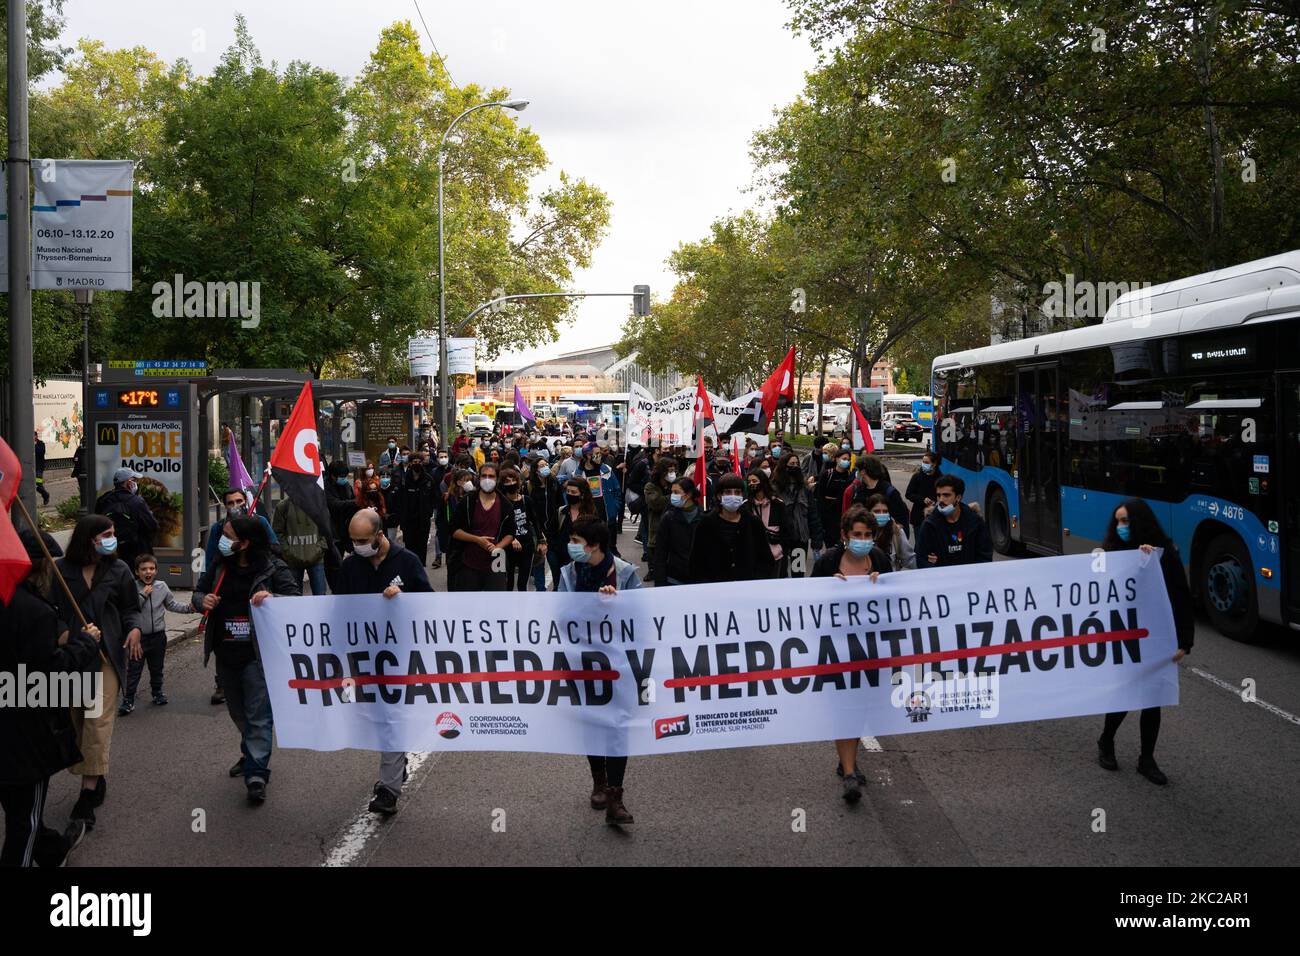 Protest in Madrid, Spain, on October 21, 2020, in defense of a research in a university without precariouness and well financed, on the banner you can read 'For research and a university for all, precariousness and comercialization'. (Photo by Jon Imanol Reino/NurPhoto) Stock Photo